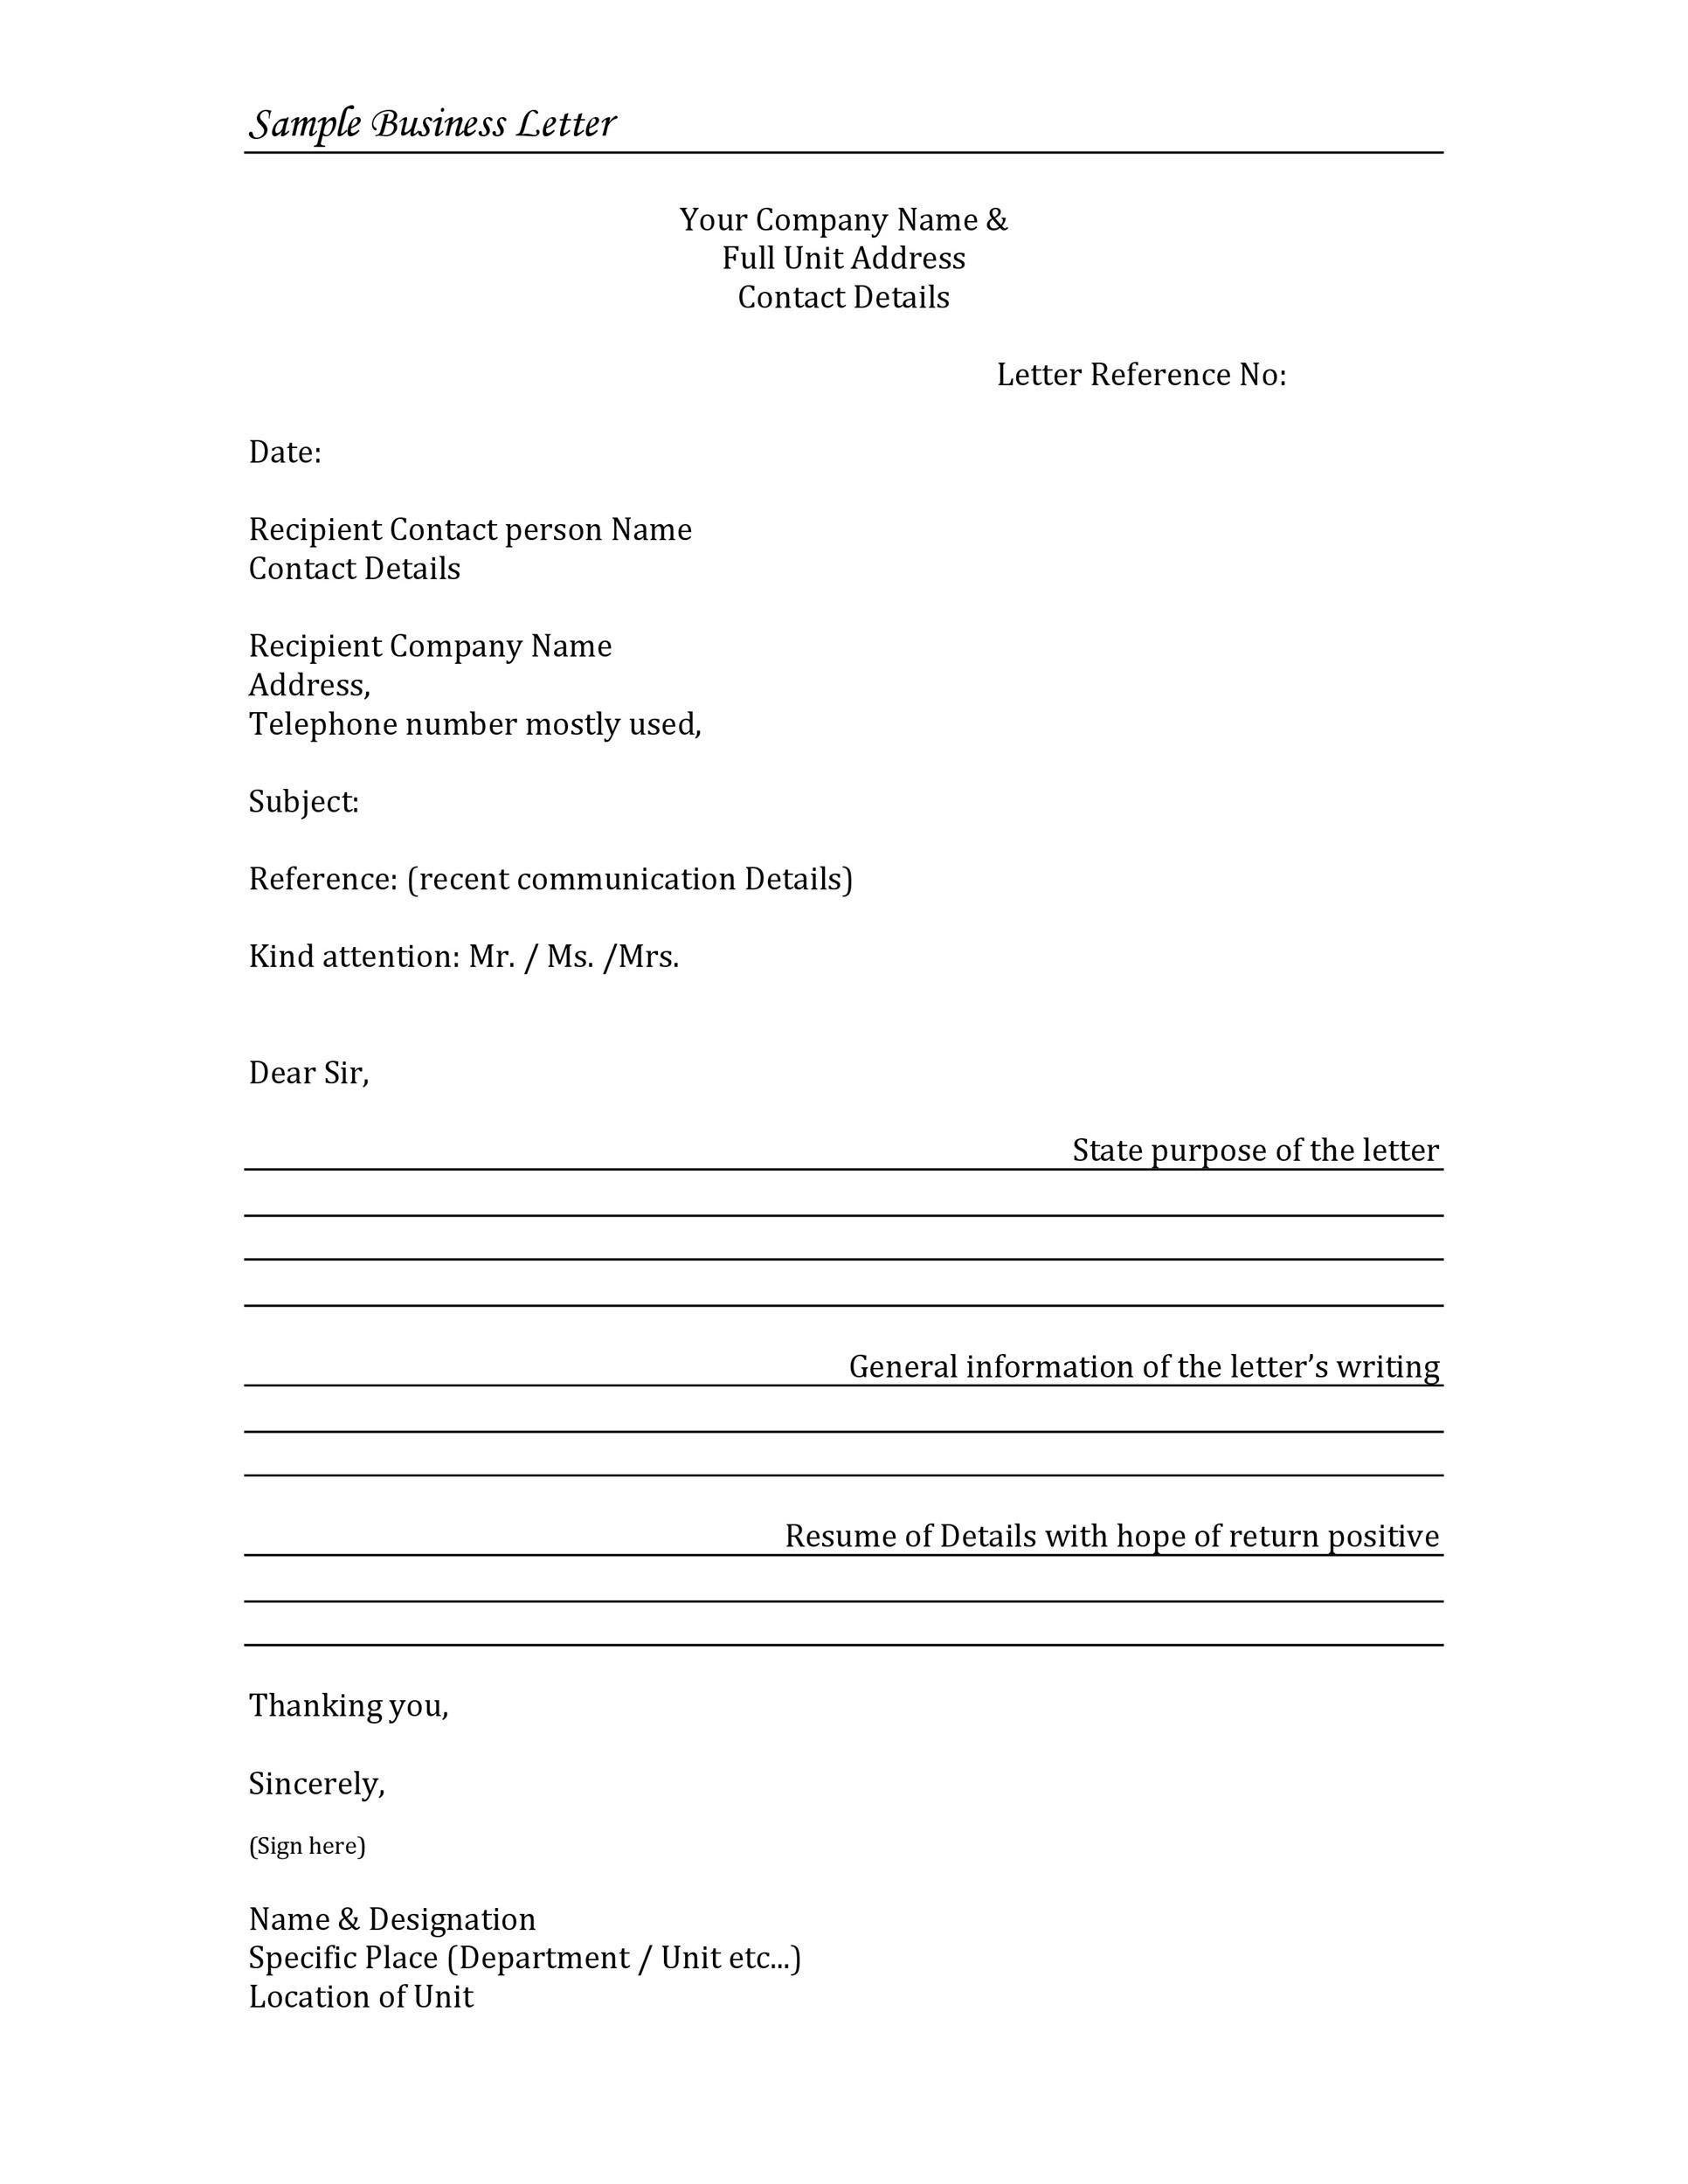 Business Form Letter Template from templatelab.com